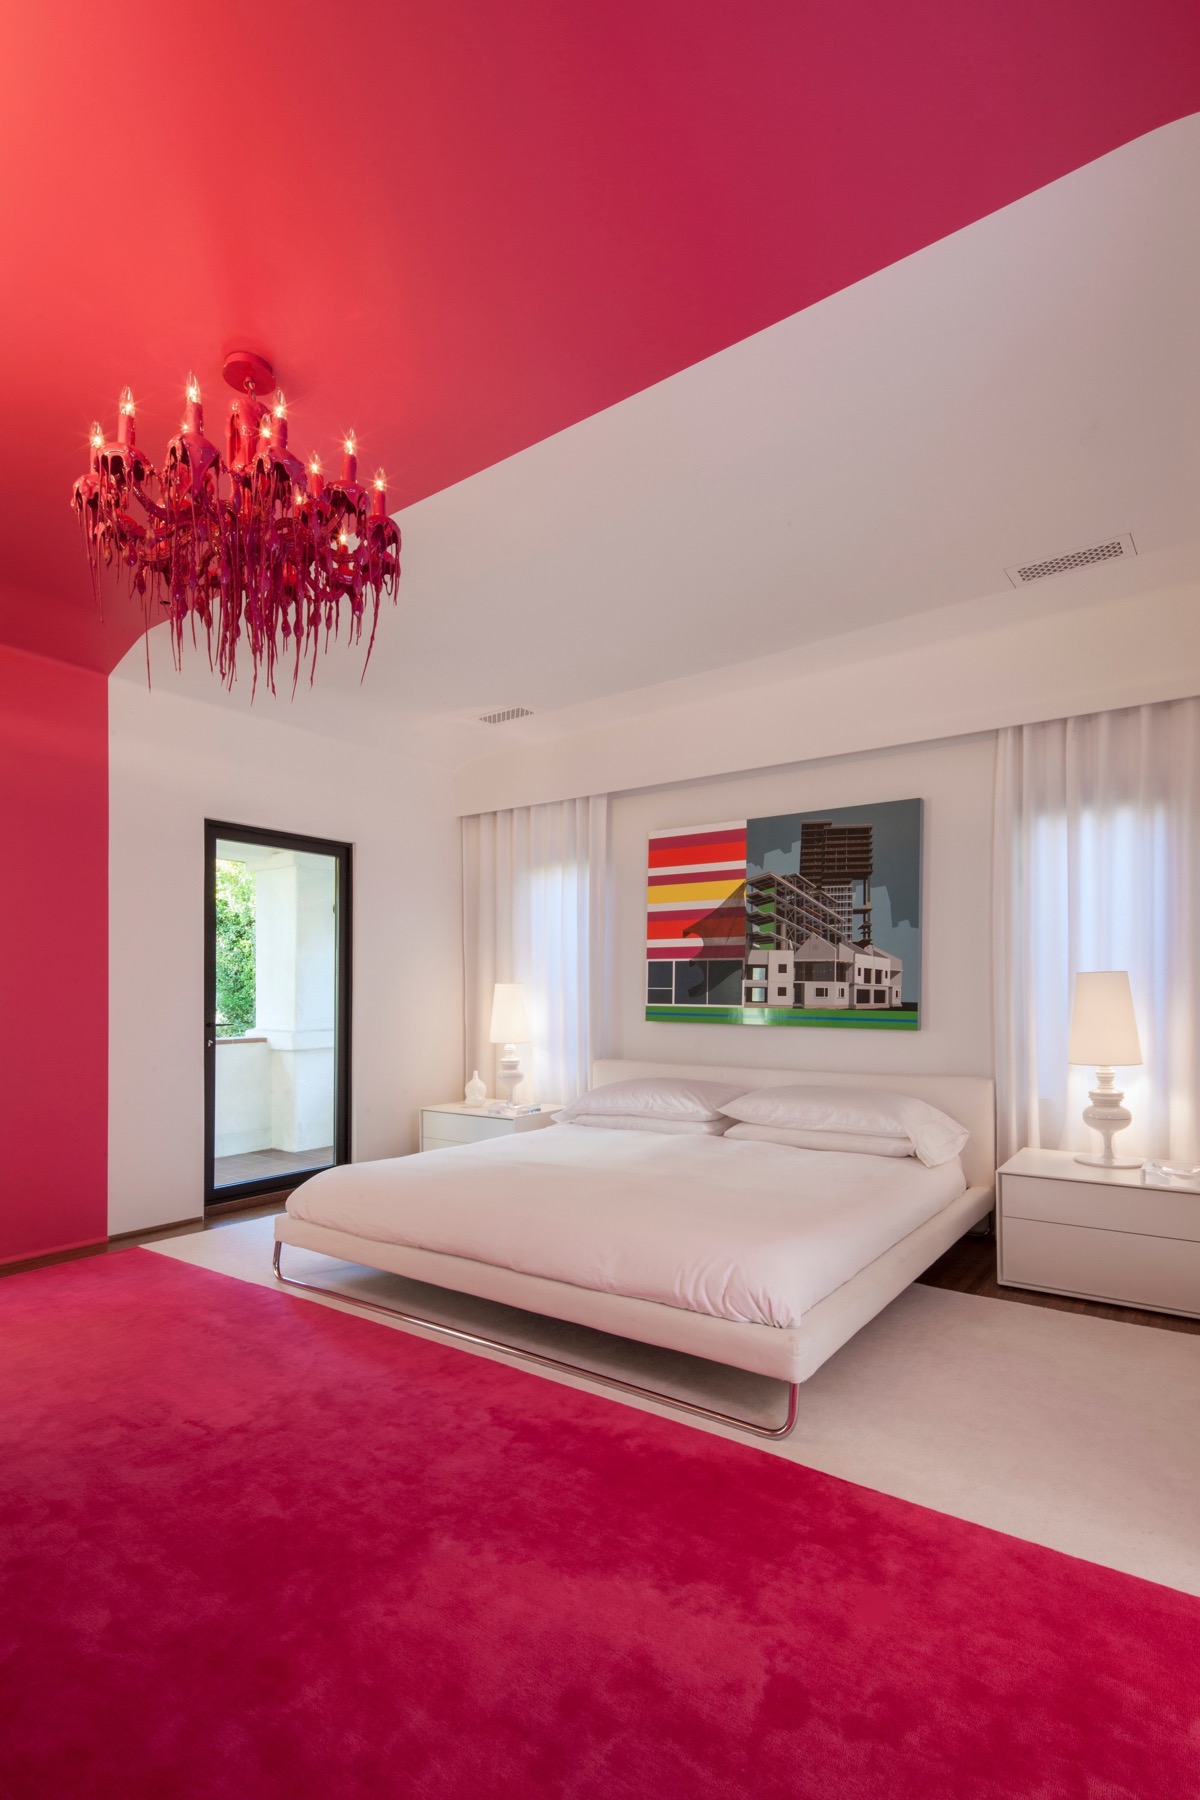 Bedroom In Red And Pink